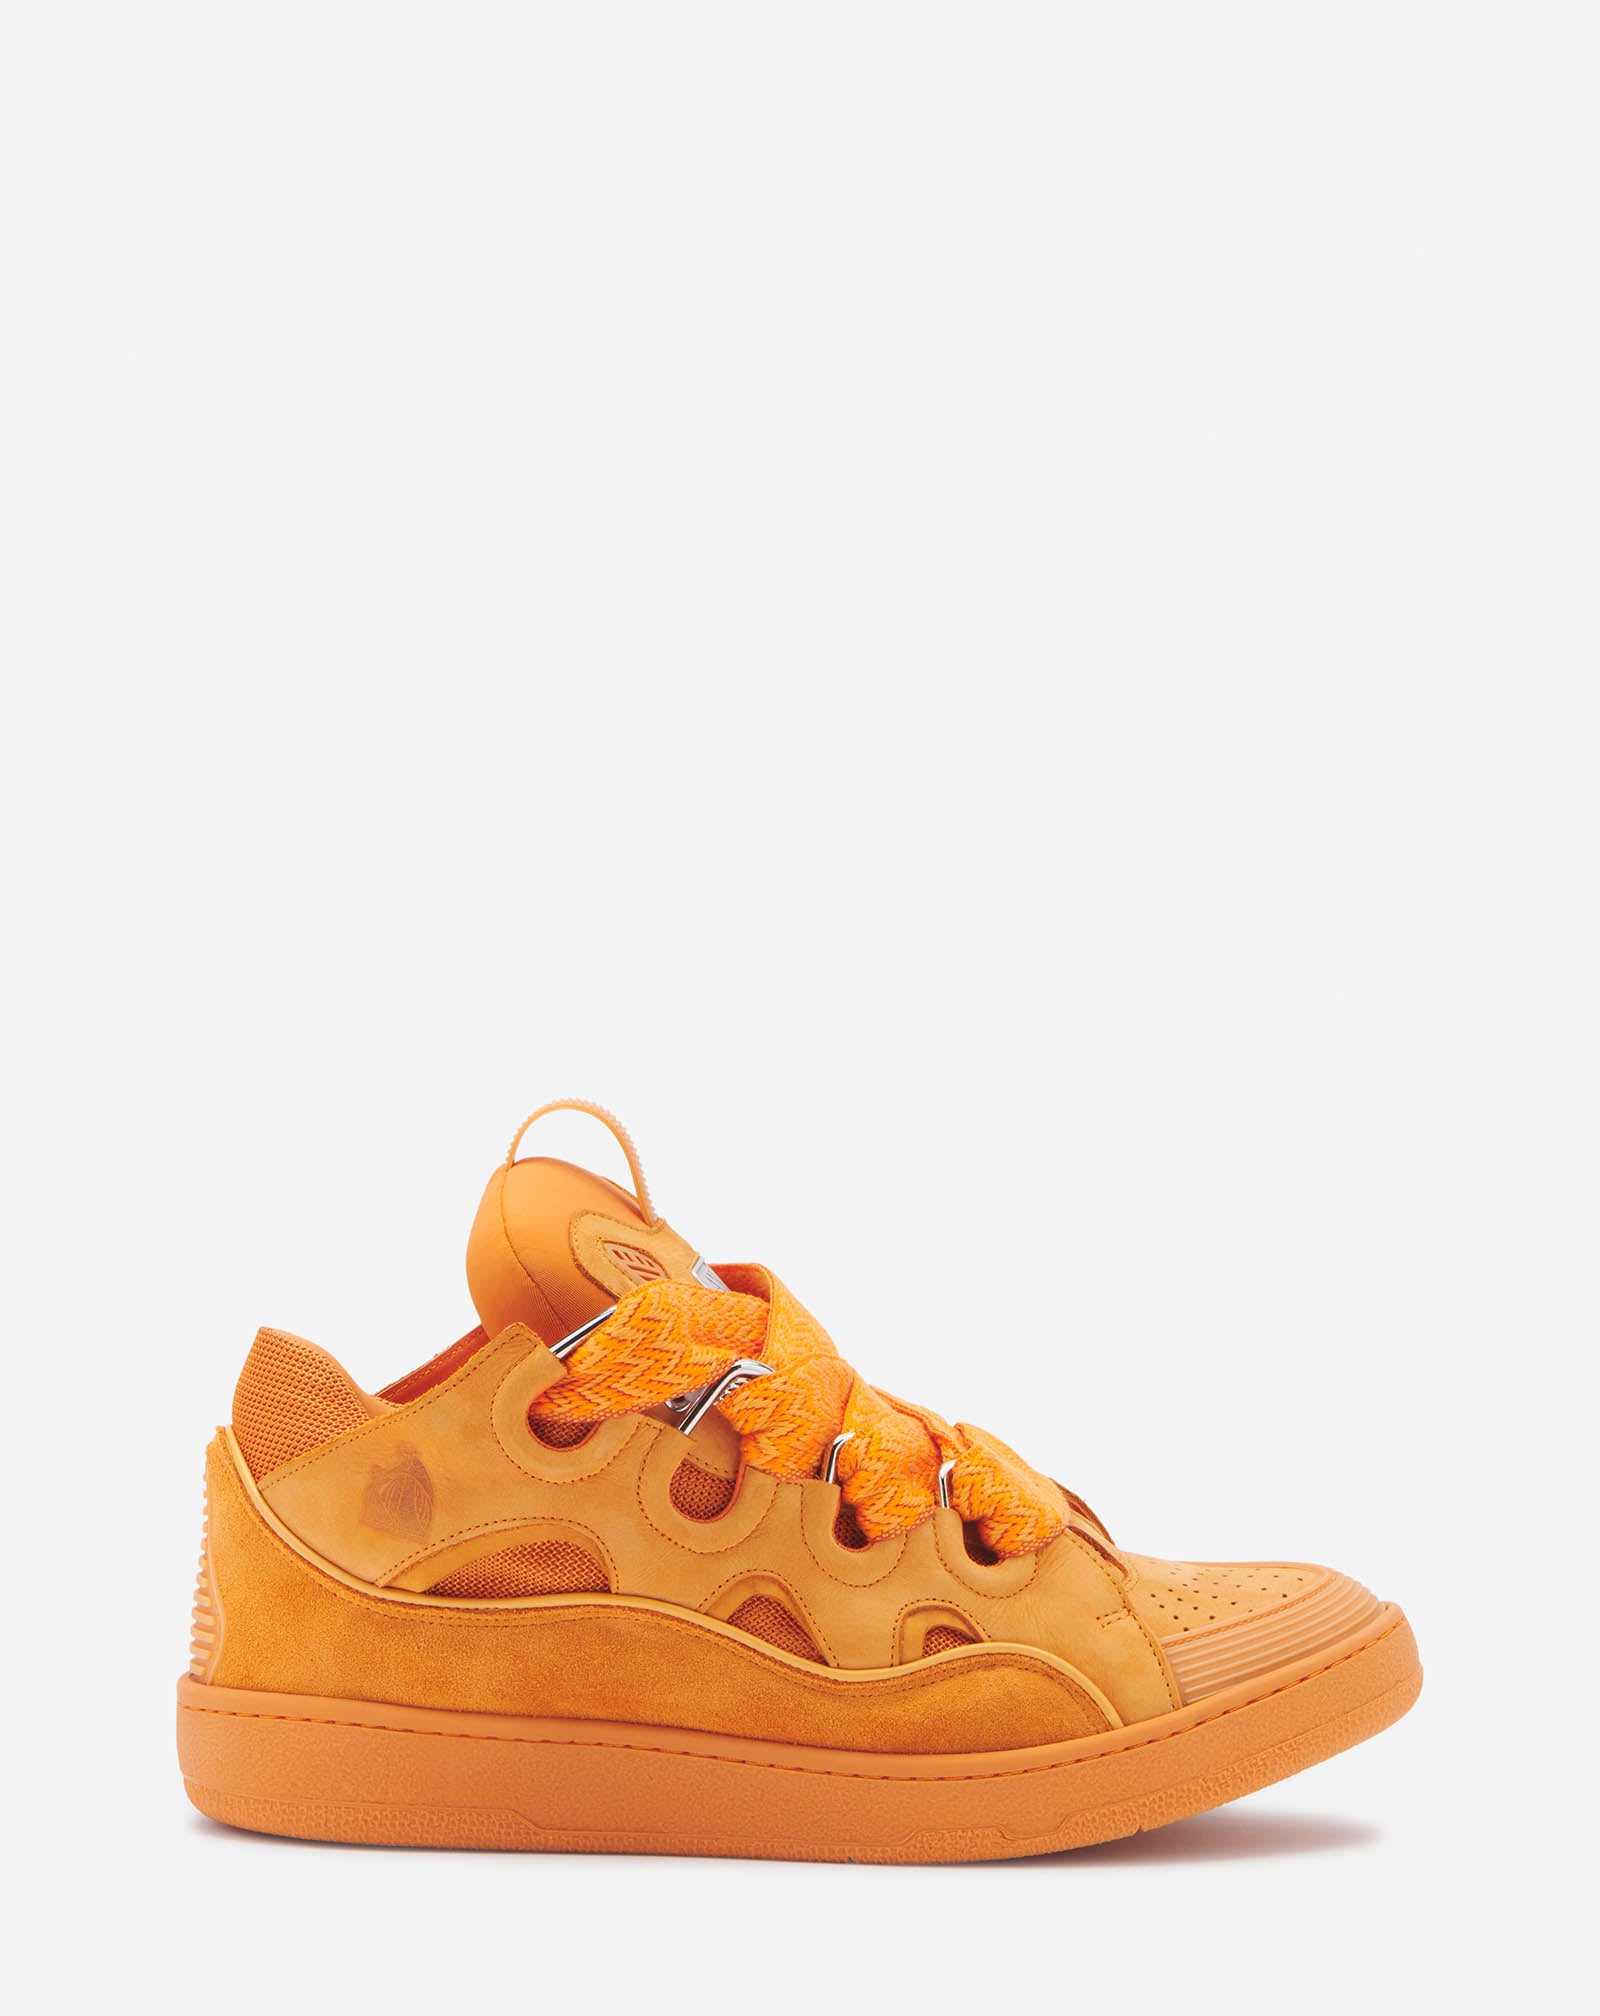 LEATHER CURB SNEAKERS MANGO – LANVIN